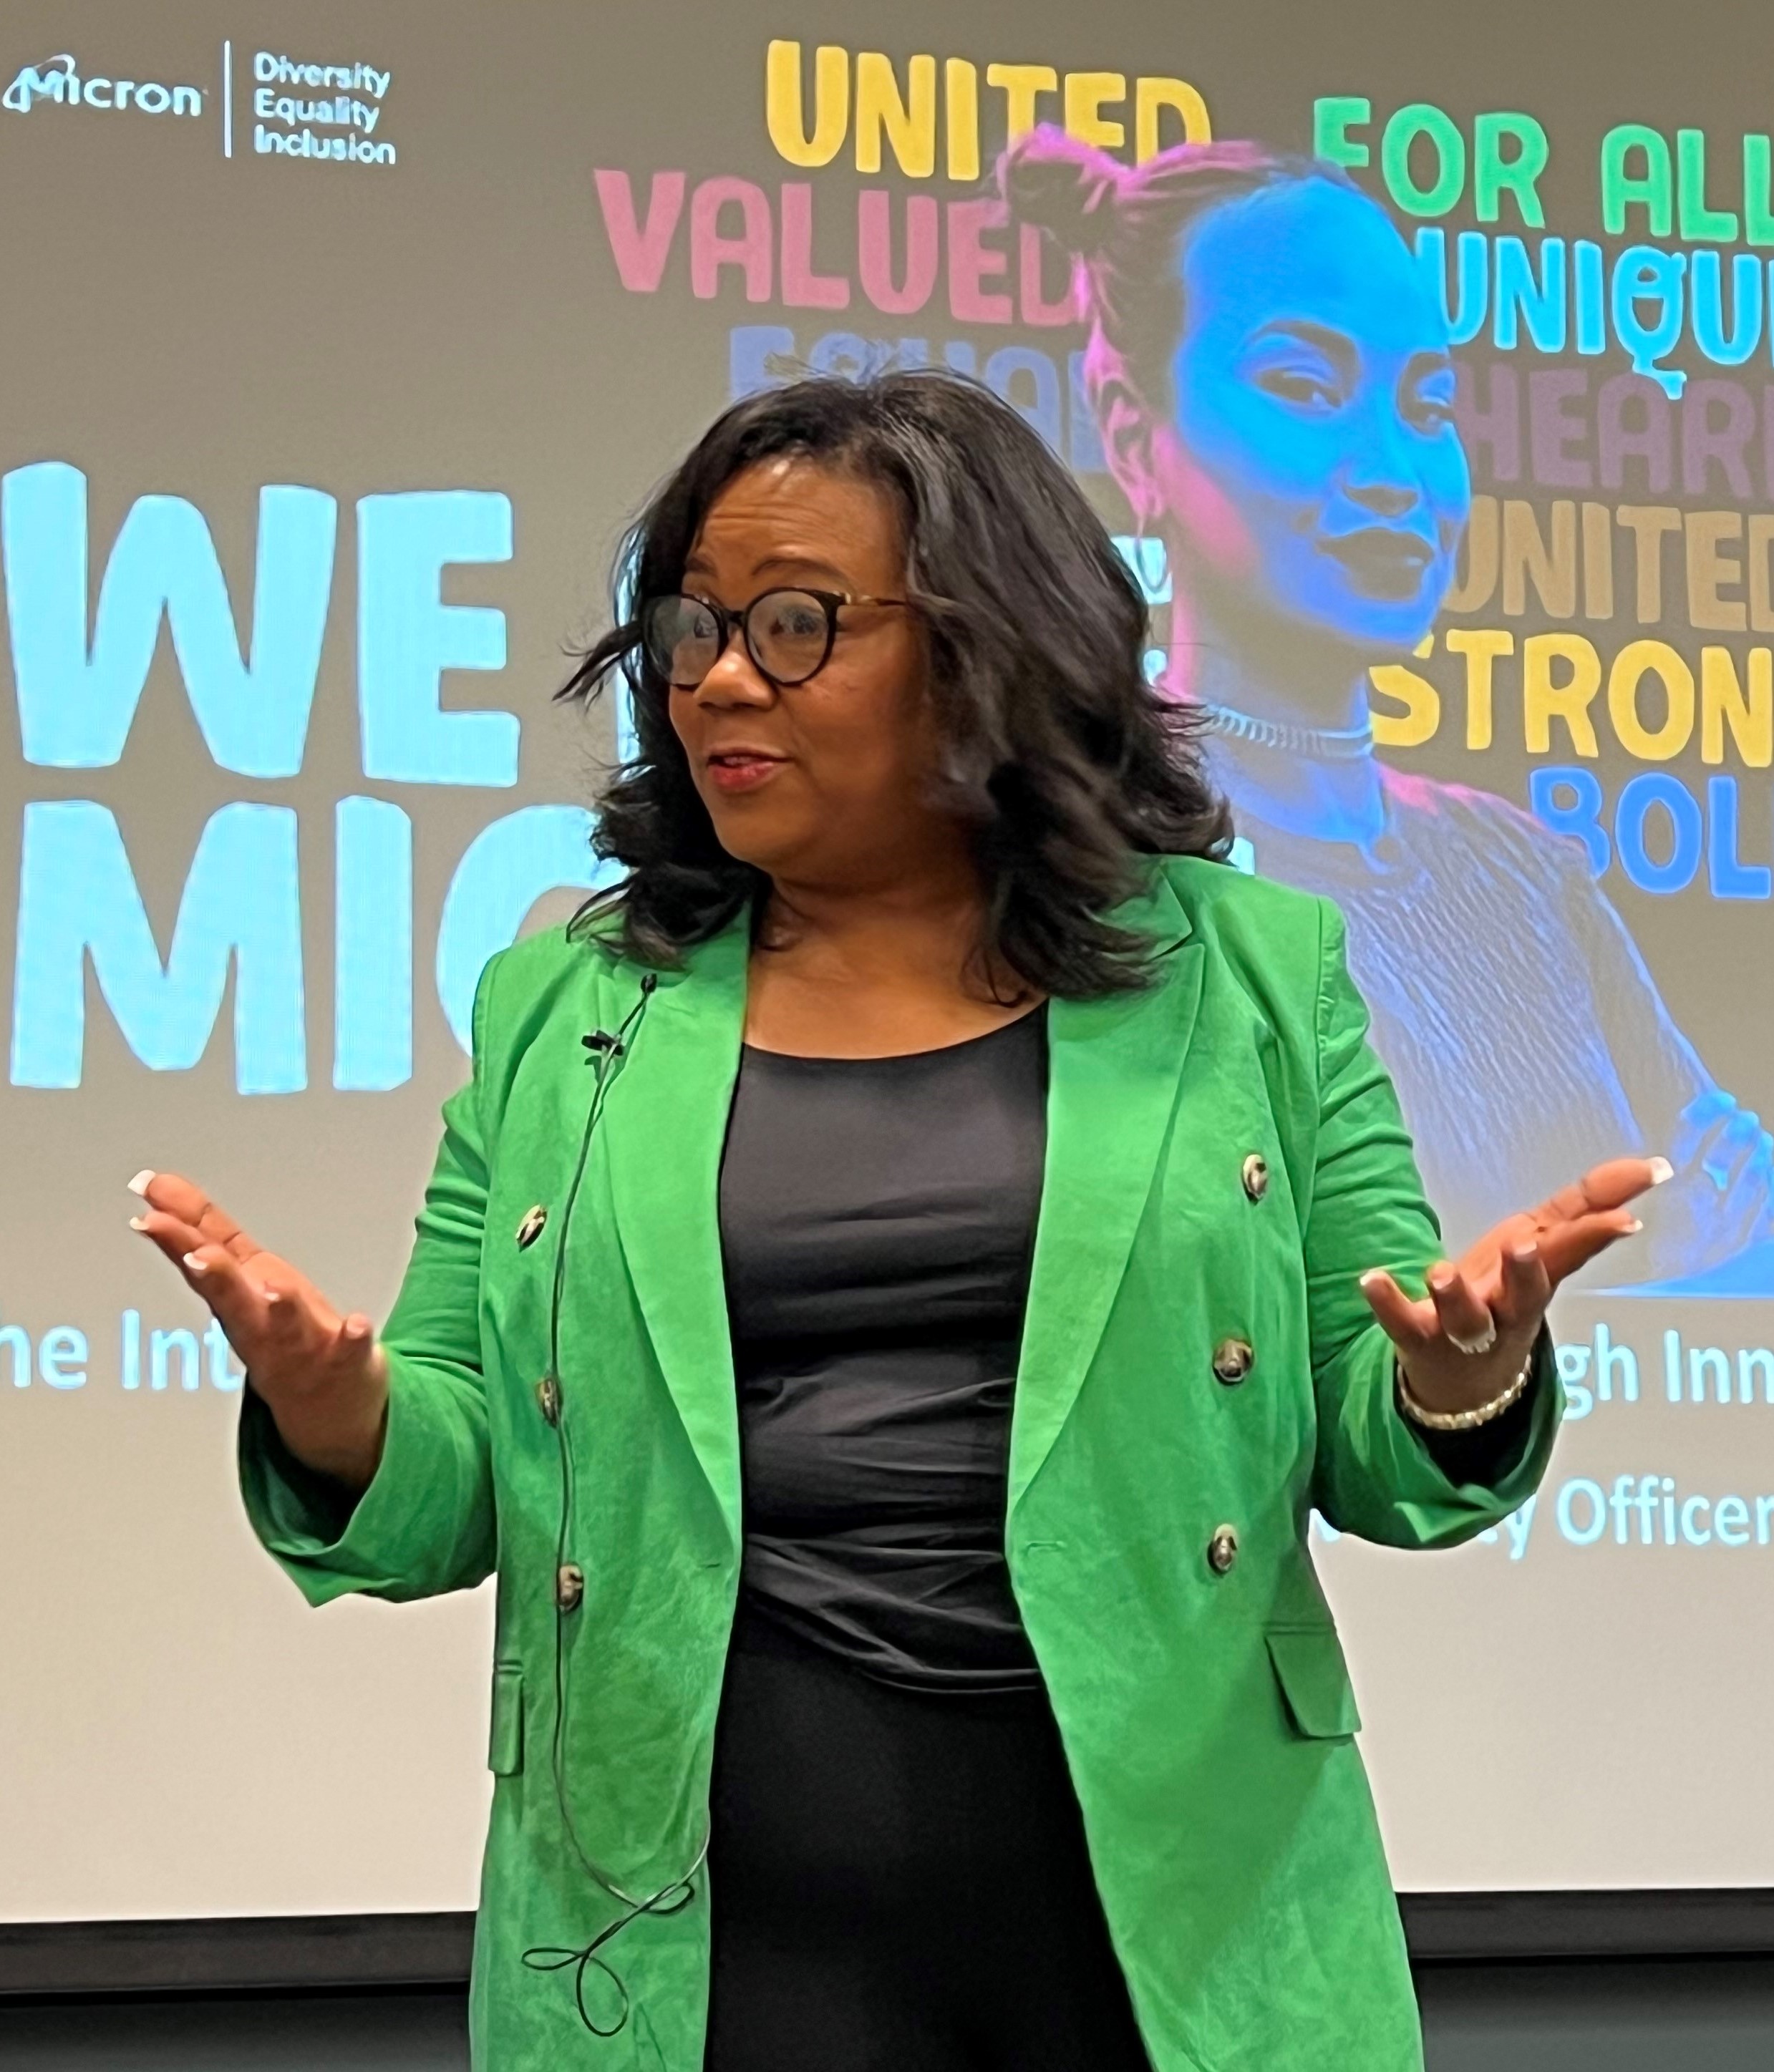 Fran Dillard, Micron's Vice President and Chief Diversity Officer, spoke on campus April 11.